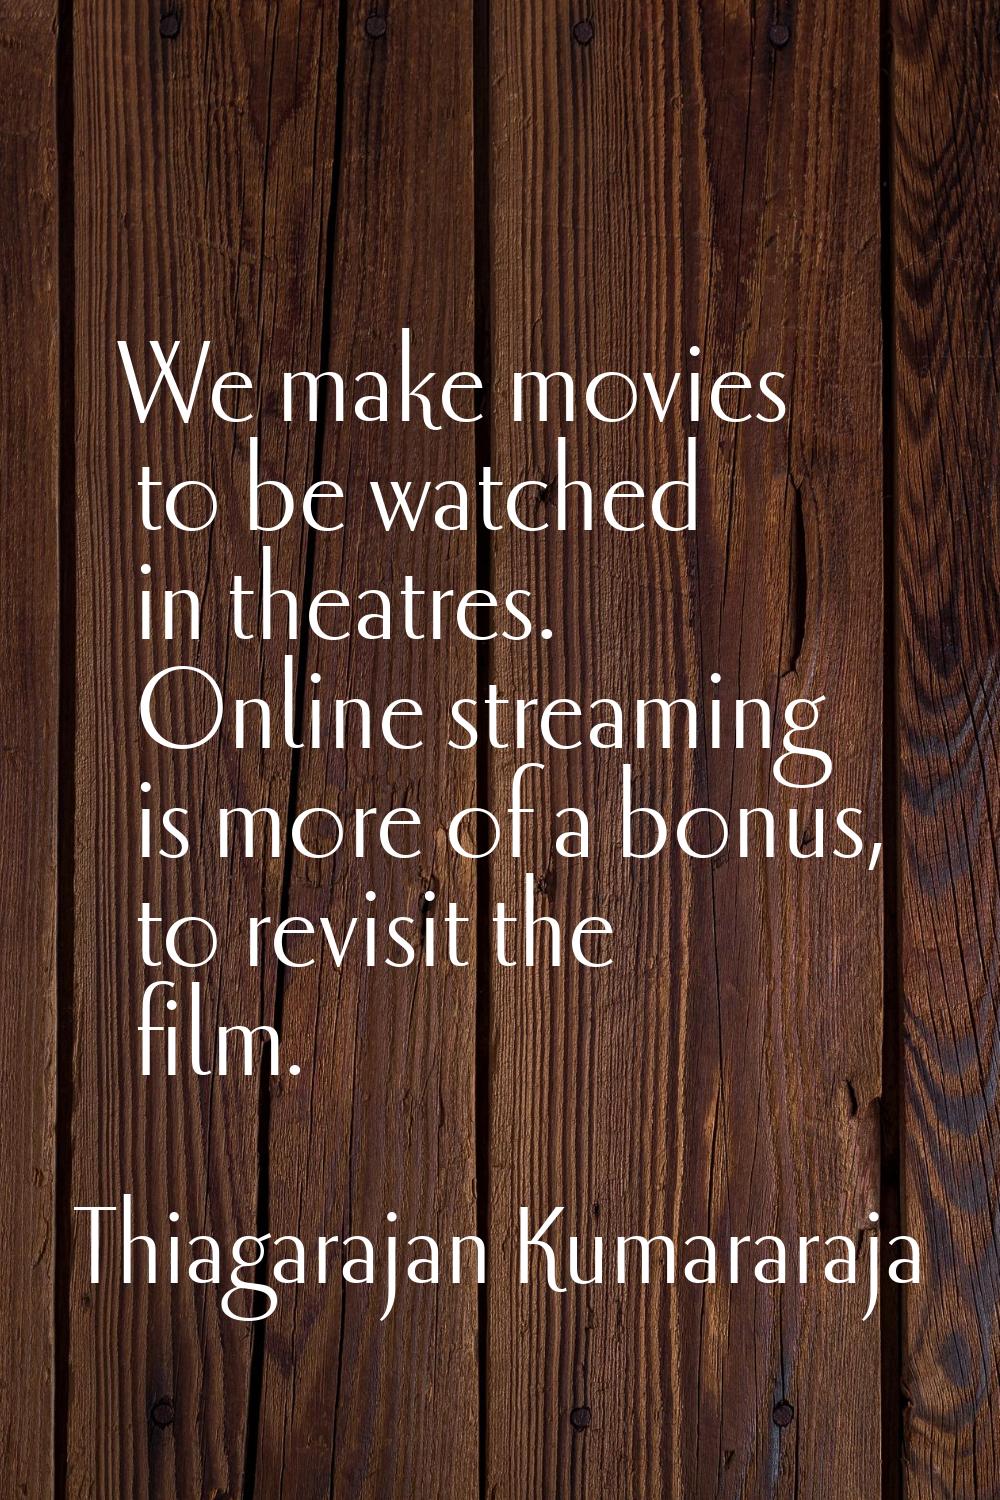 We make movies to be watched in theatres. Online streaming is more of a bonus, to revisit the film.